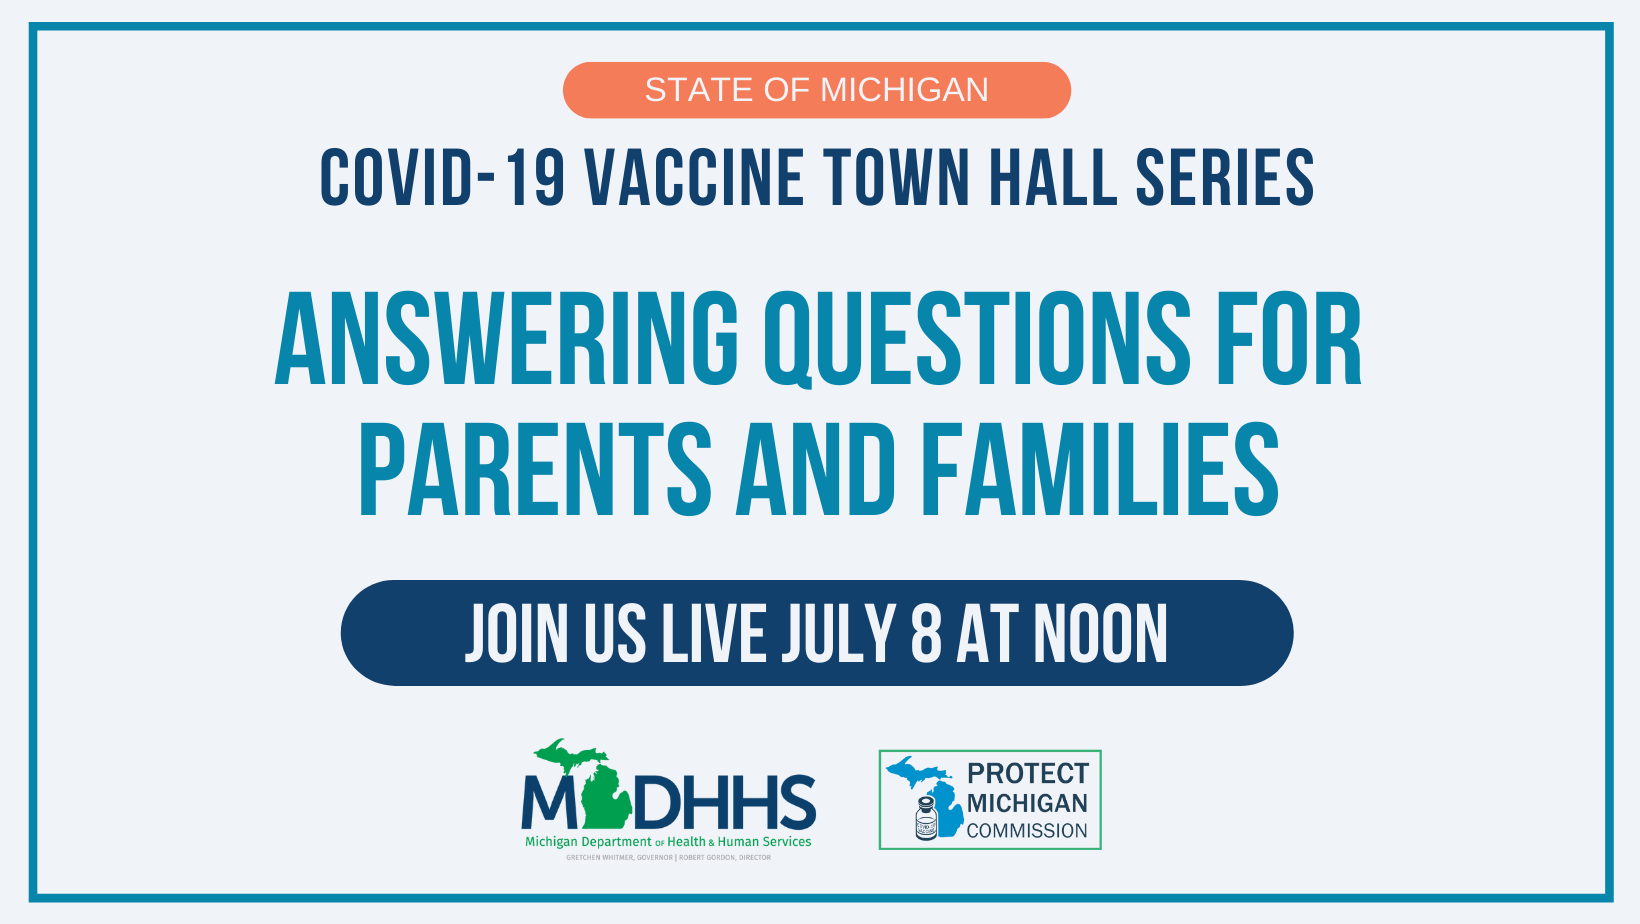 COVID-19 Vaccine Town Hall Series, Answering questions for parents and families. Join us live on July 8 at noon.